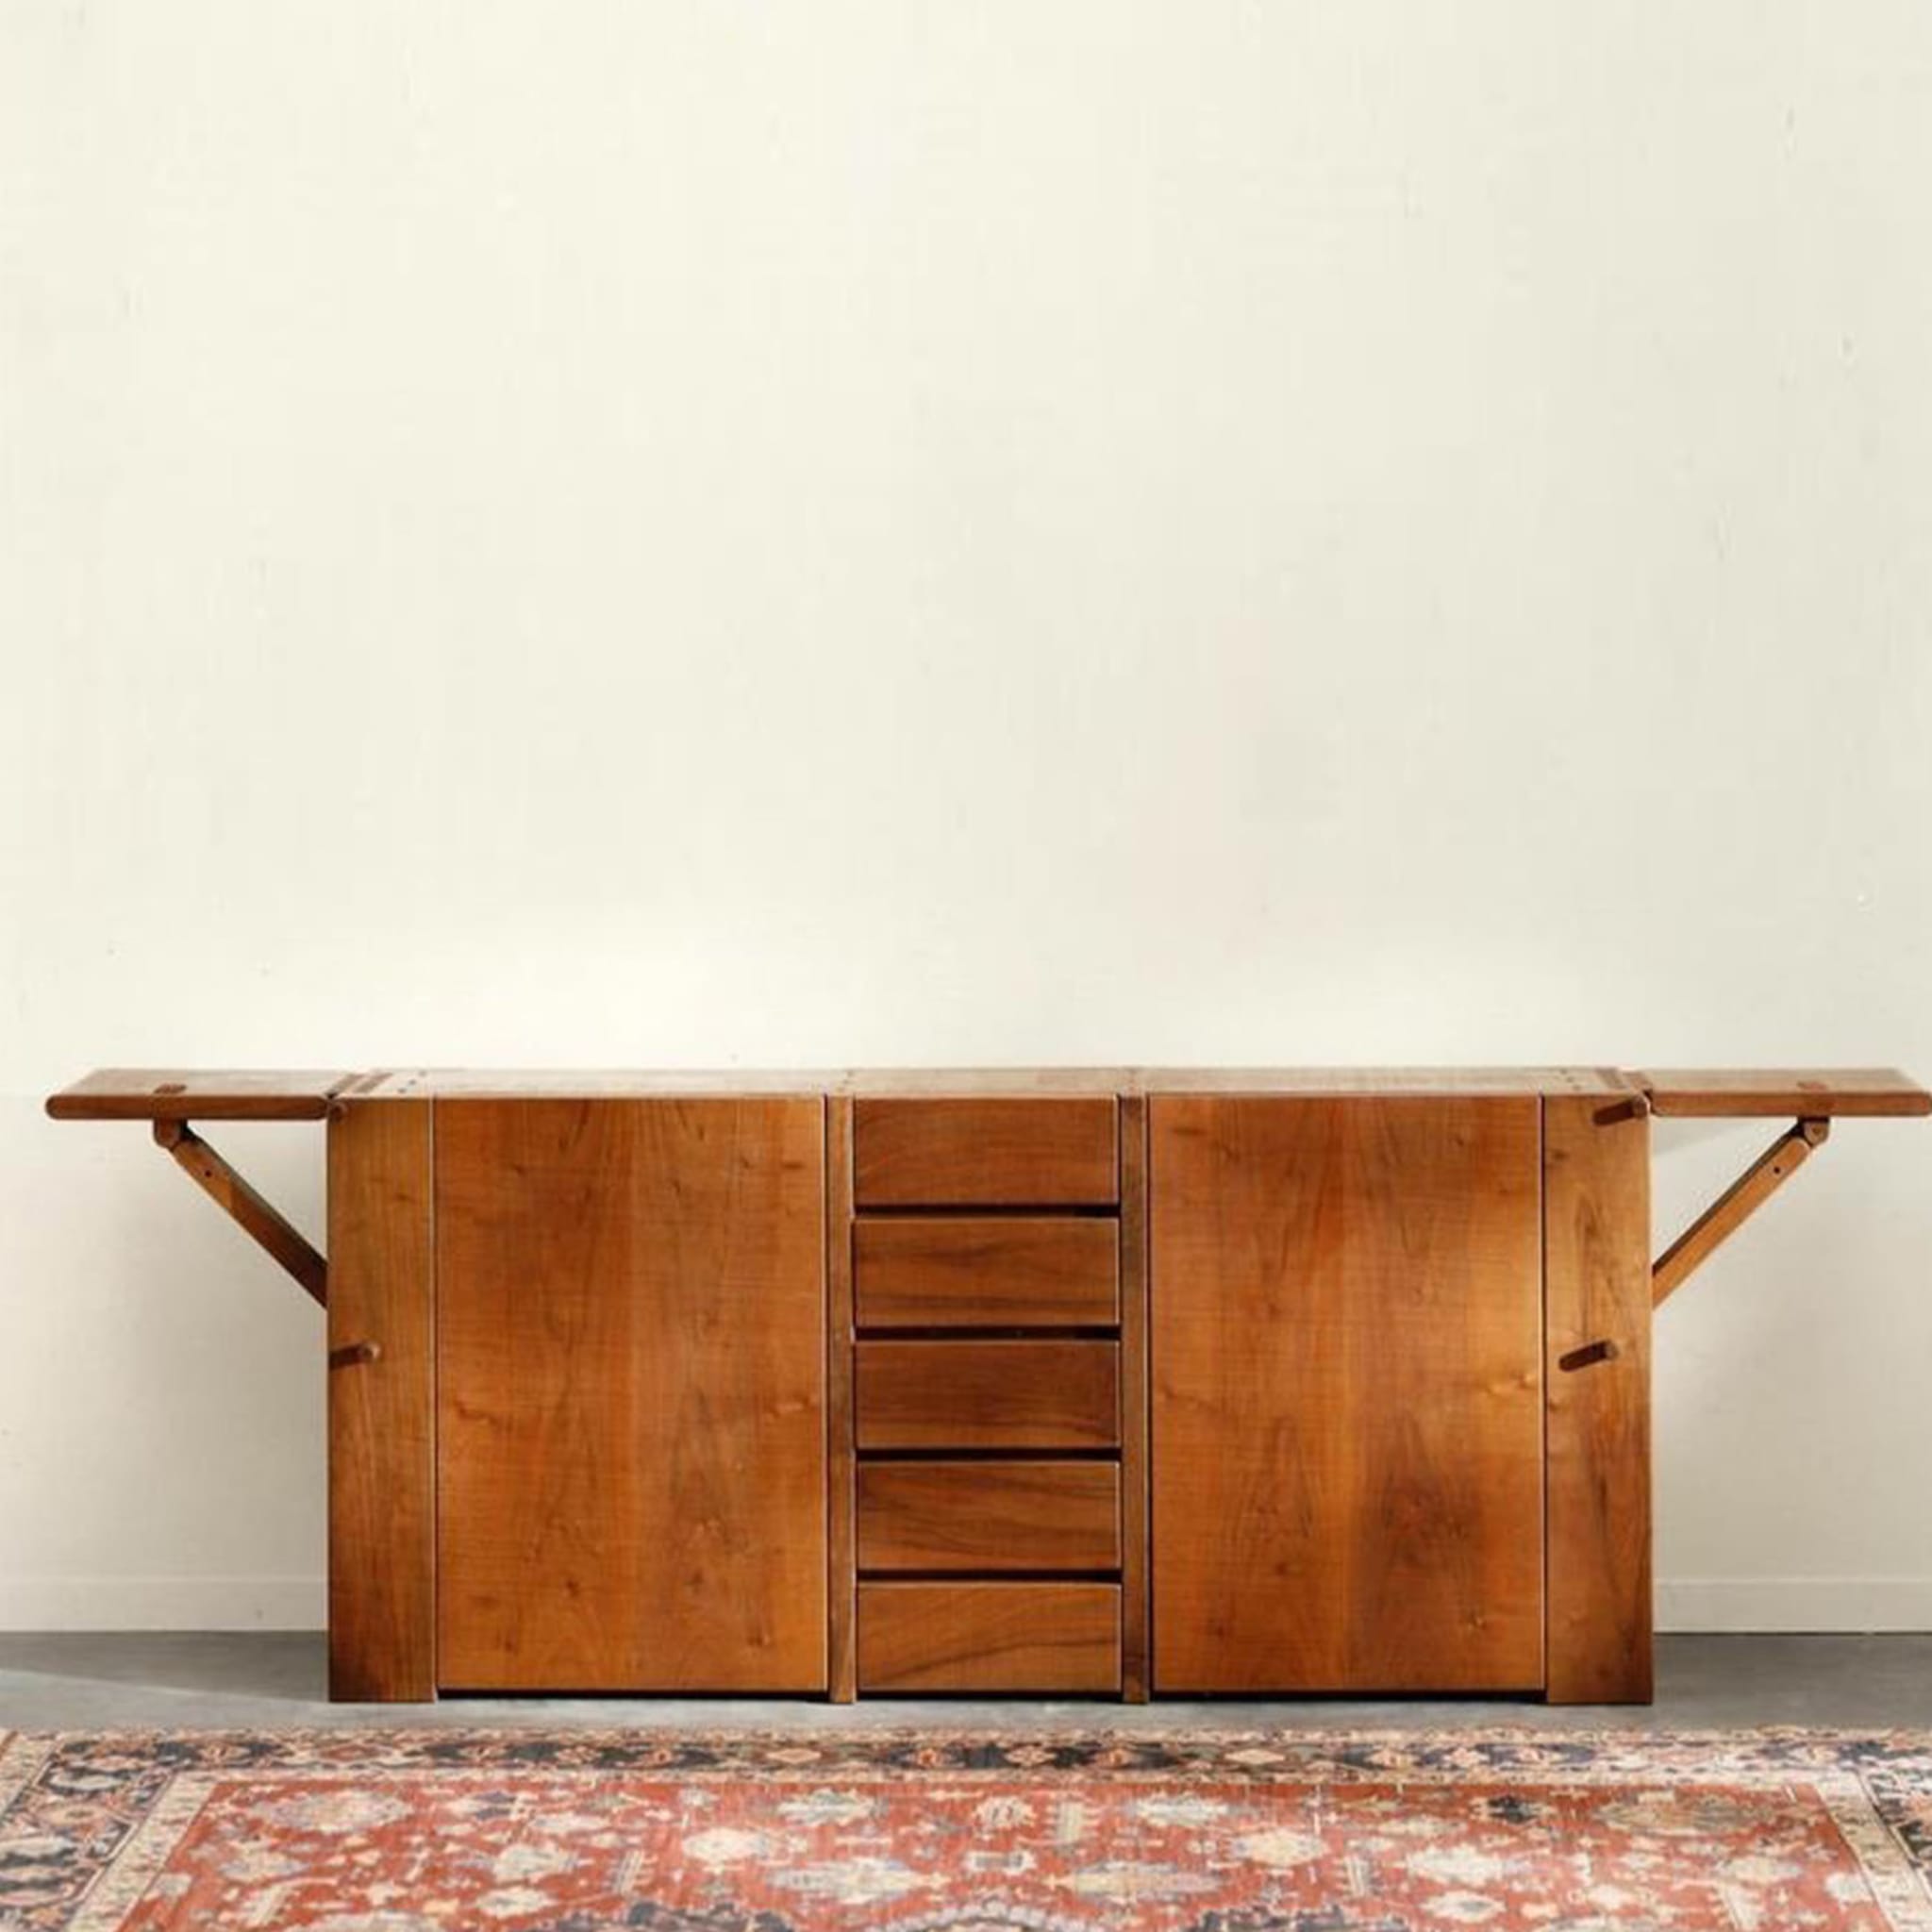 Del Transetto 2-Door Walnut Sideboard with Drawers - Alternative view 2